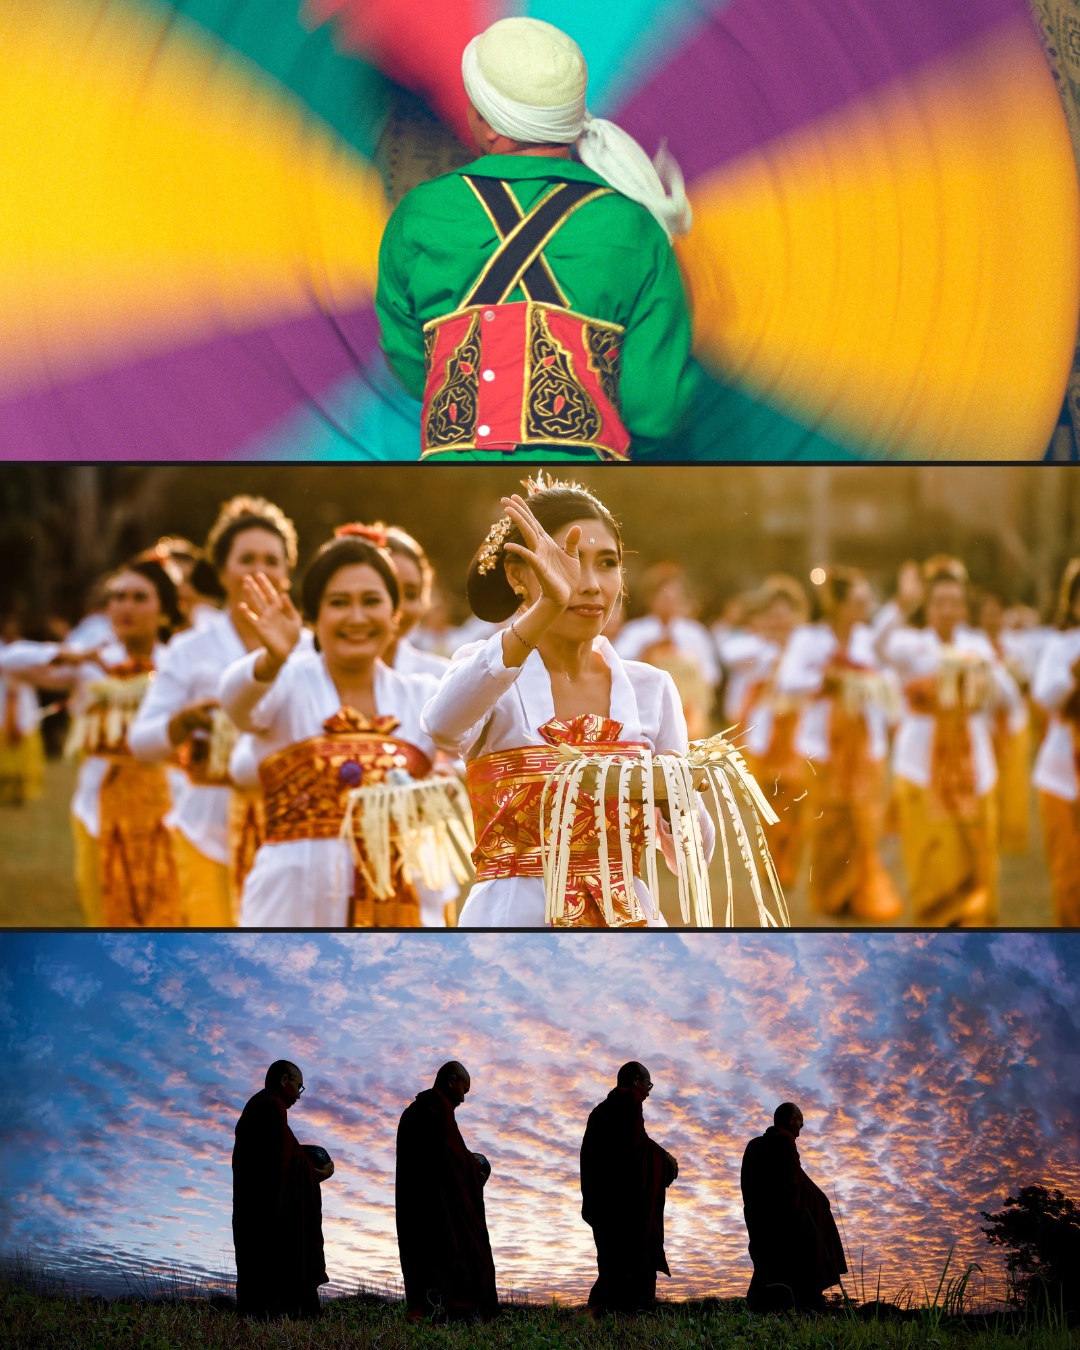 Image of three diverse religious traditions. The top image is of a sufi mystic spinning a colorful baton. The second image is of a woman dressed in traditional Hindu wedding garments and dancing. The bottom image is of a group of Buddhist monks backlit walking in a line.